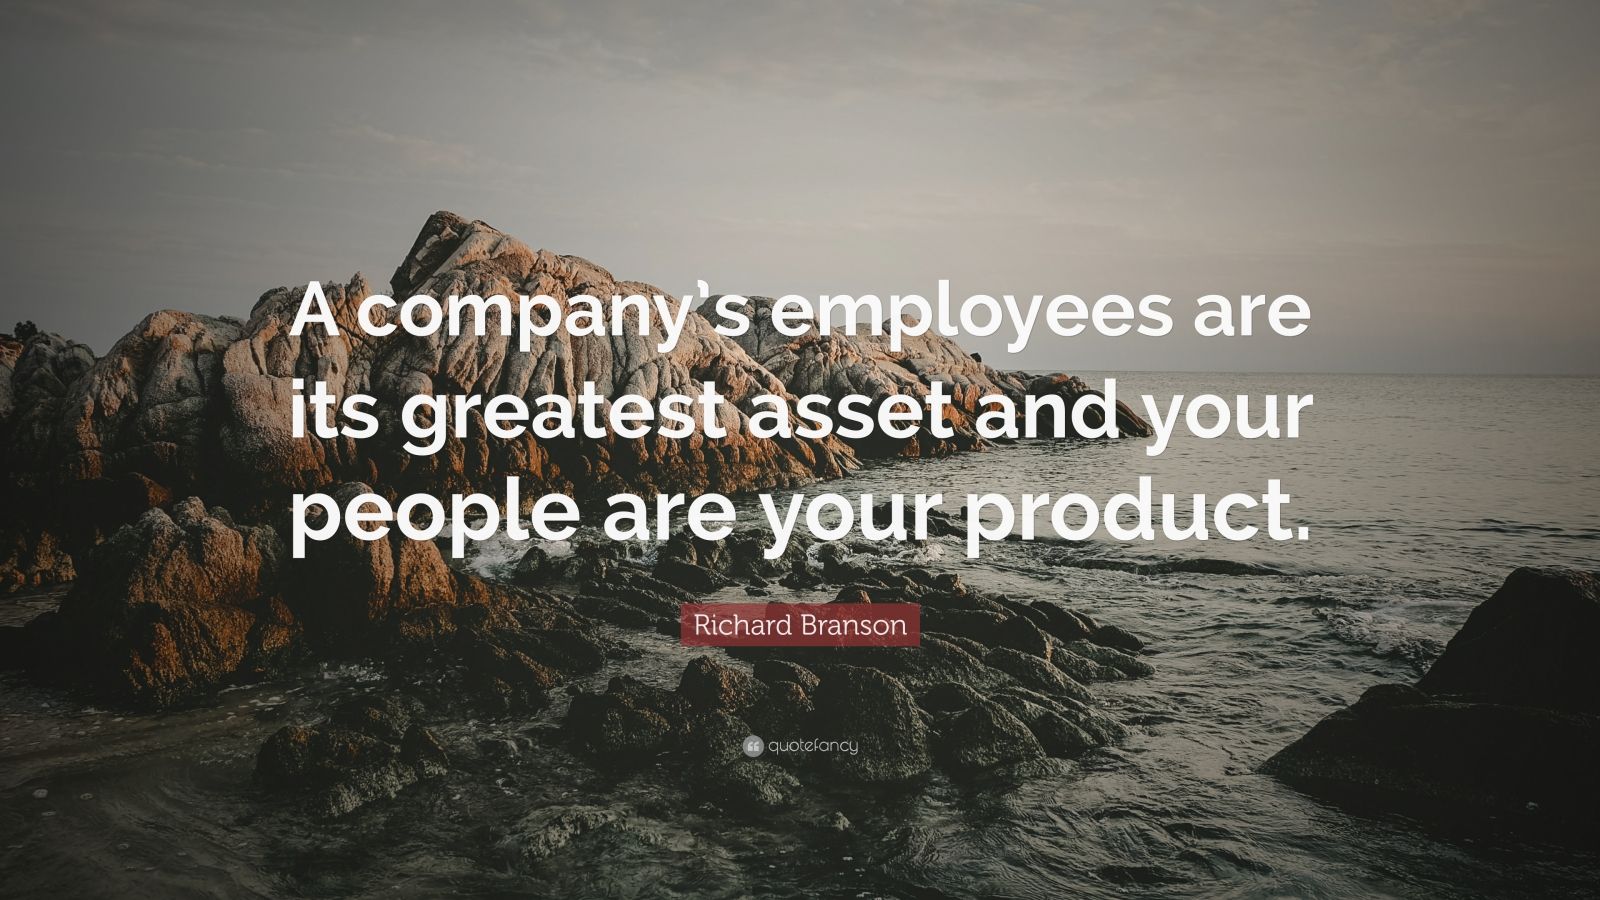 employee journey in a company quotes